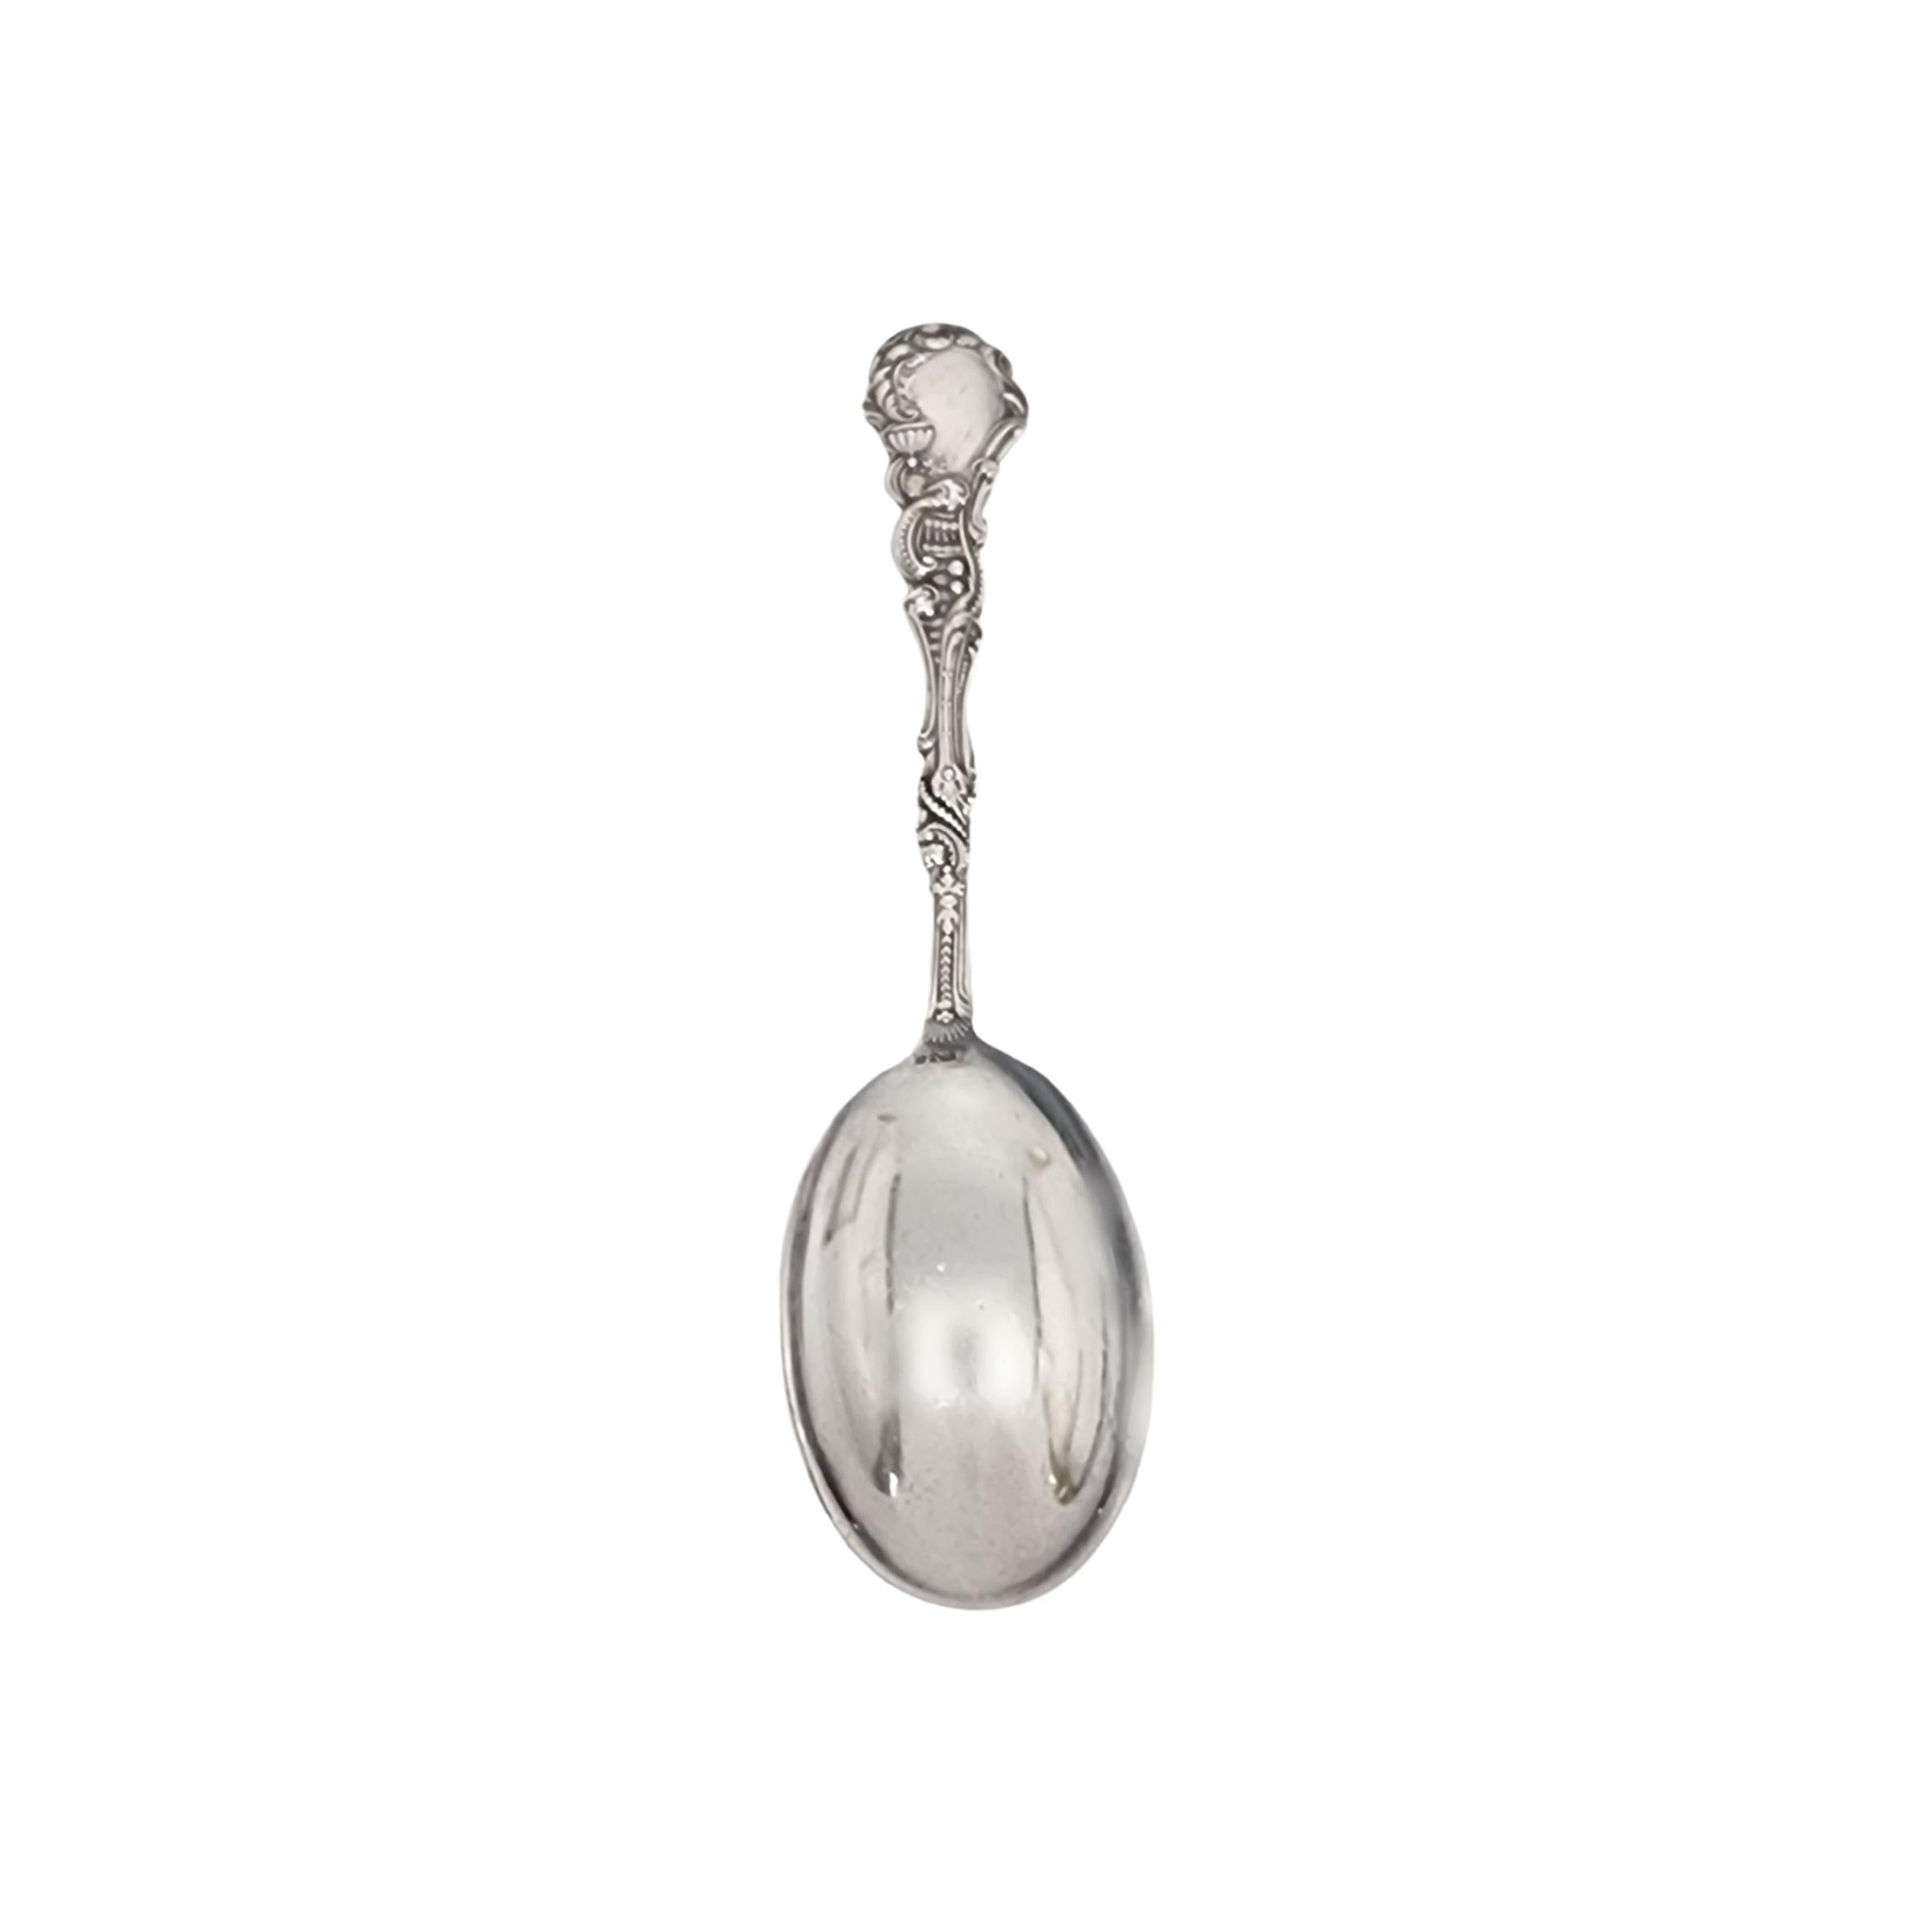 Gorham Versailles Sterling Silver Pap Spoon For Sale 3